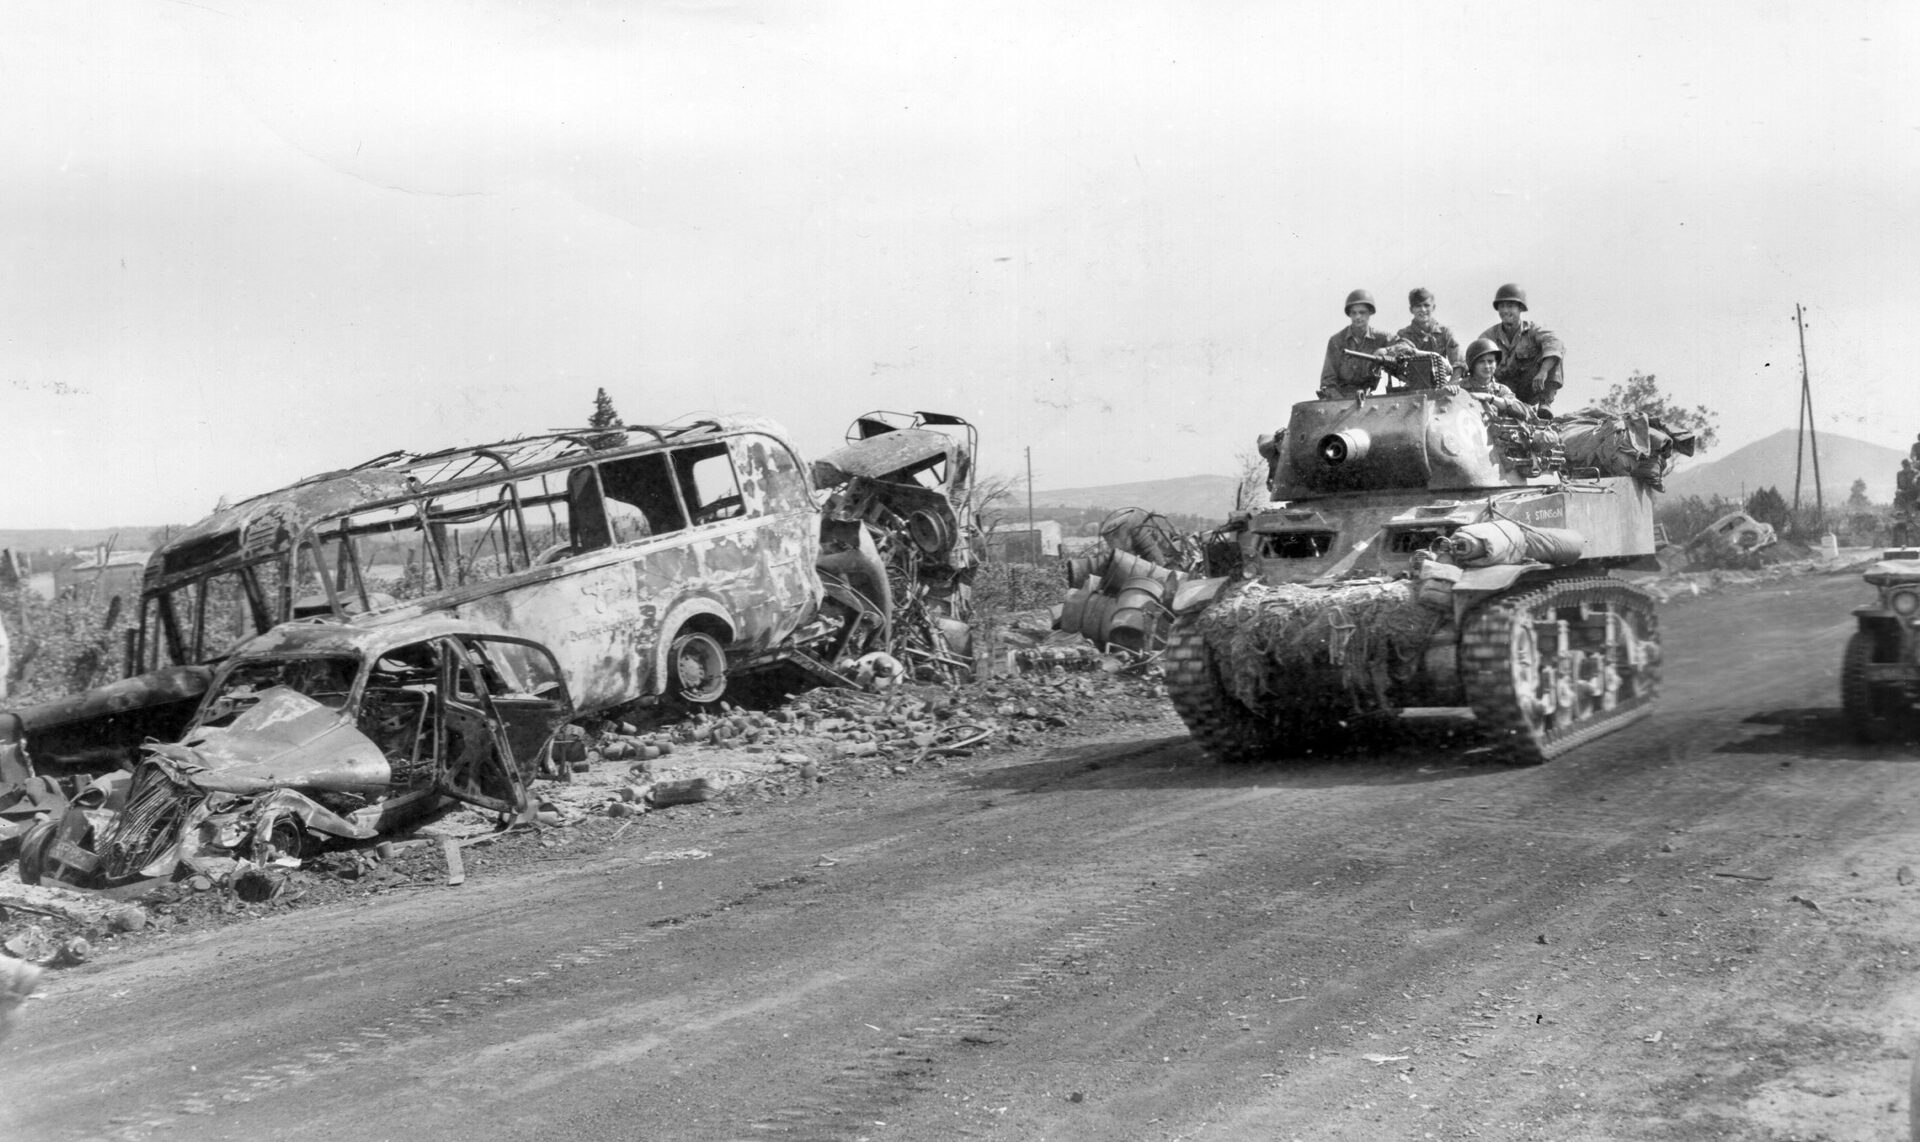 An American M8 gun carriage—an M5 Stuart light tank modified to carry a 75mm howitzer—rolls past the charred wreckage of a bus caught in the fighting along a road near Montelimar.